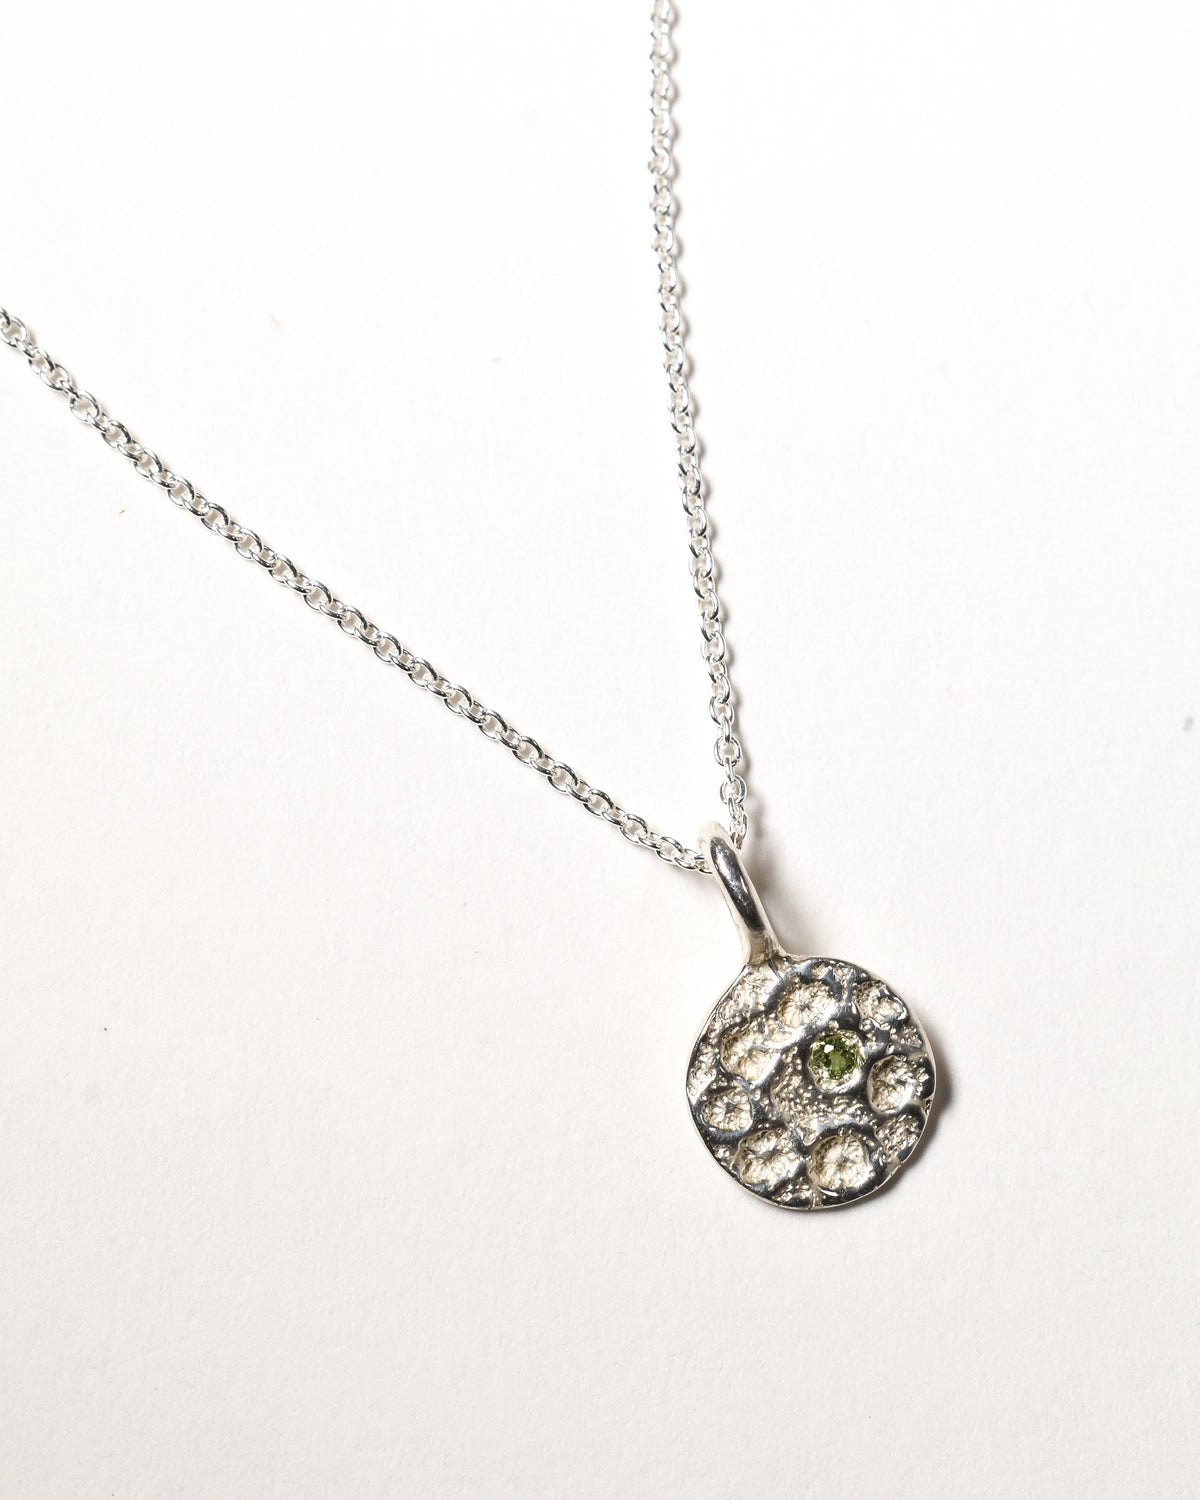 Peridot Birthstone Necklace - August - Sterling Silver